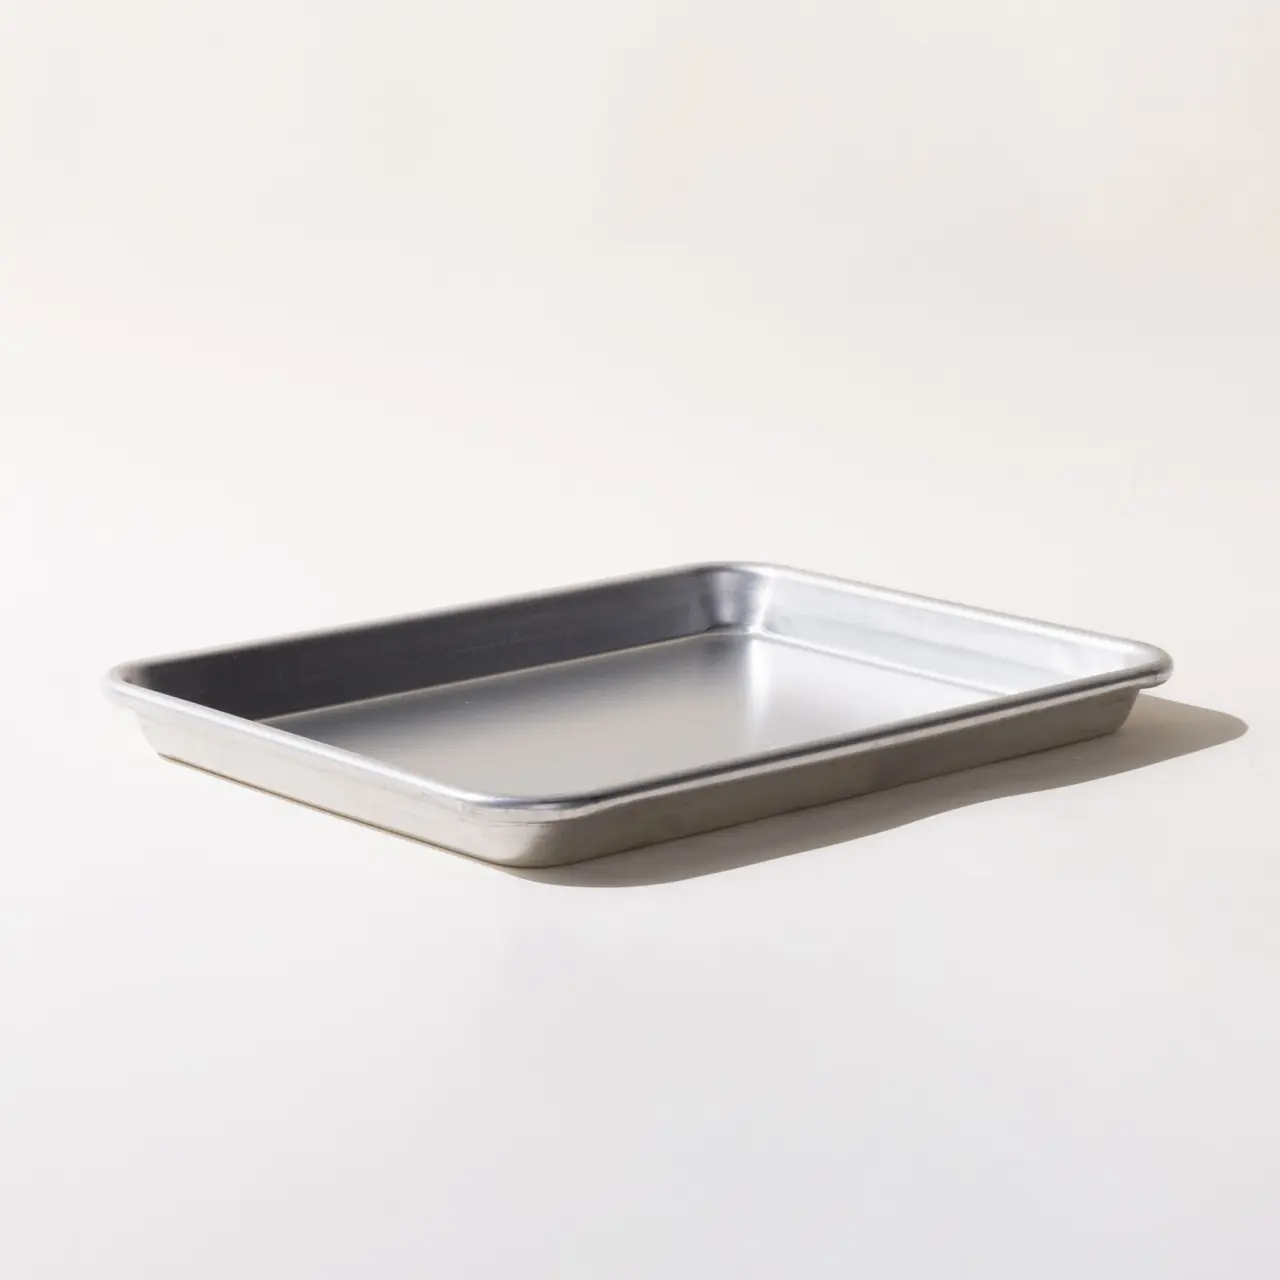 A rectangular metal baking sheet is placed on a white surface with a light shadow casting to the side.